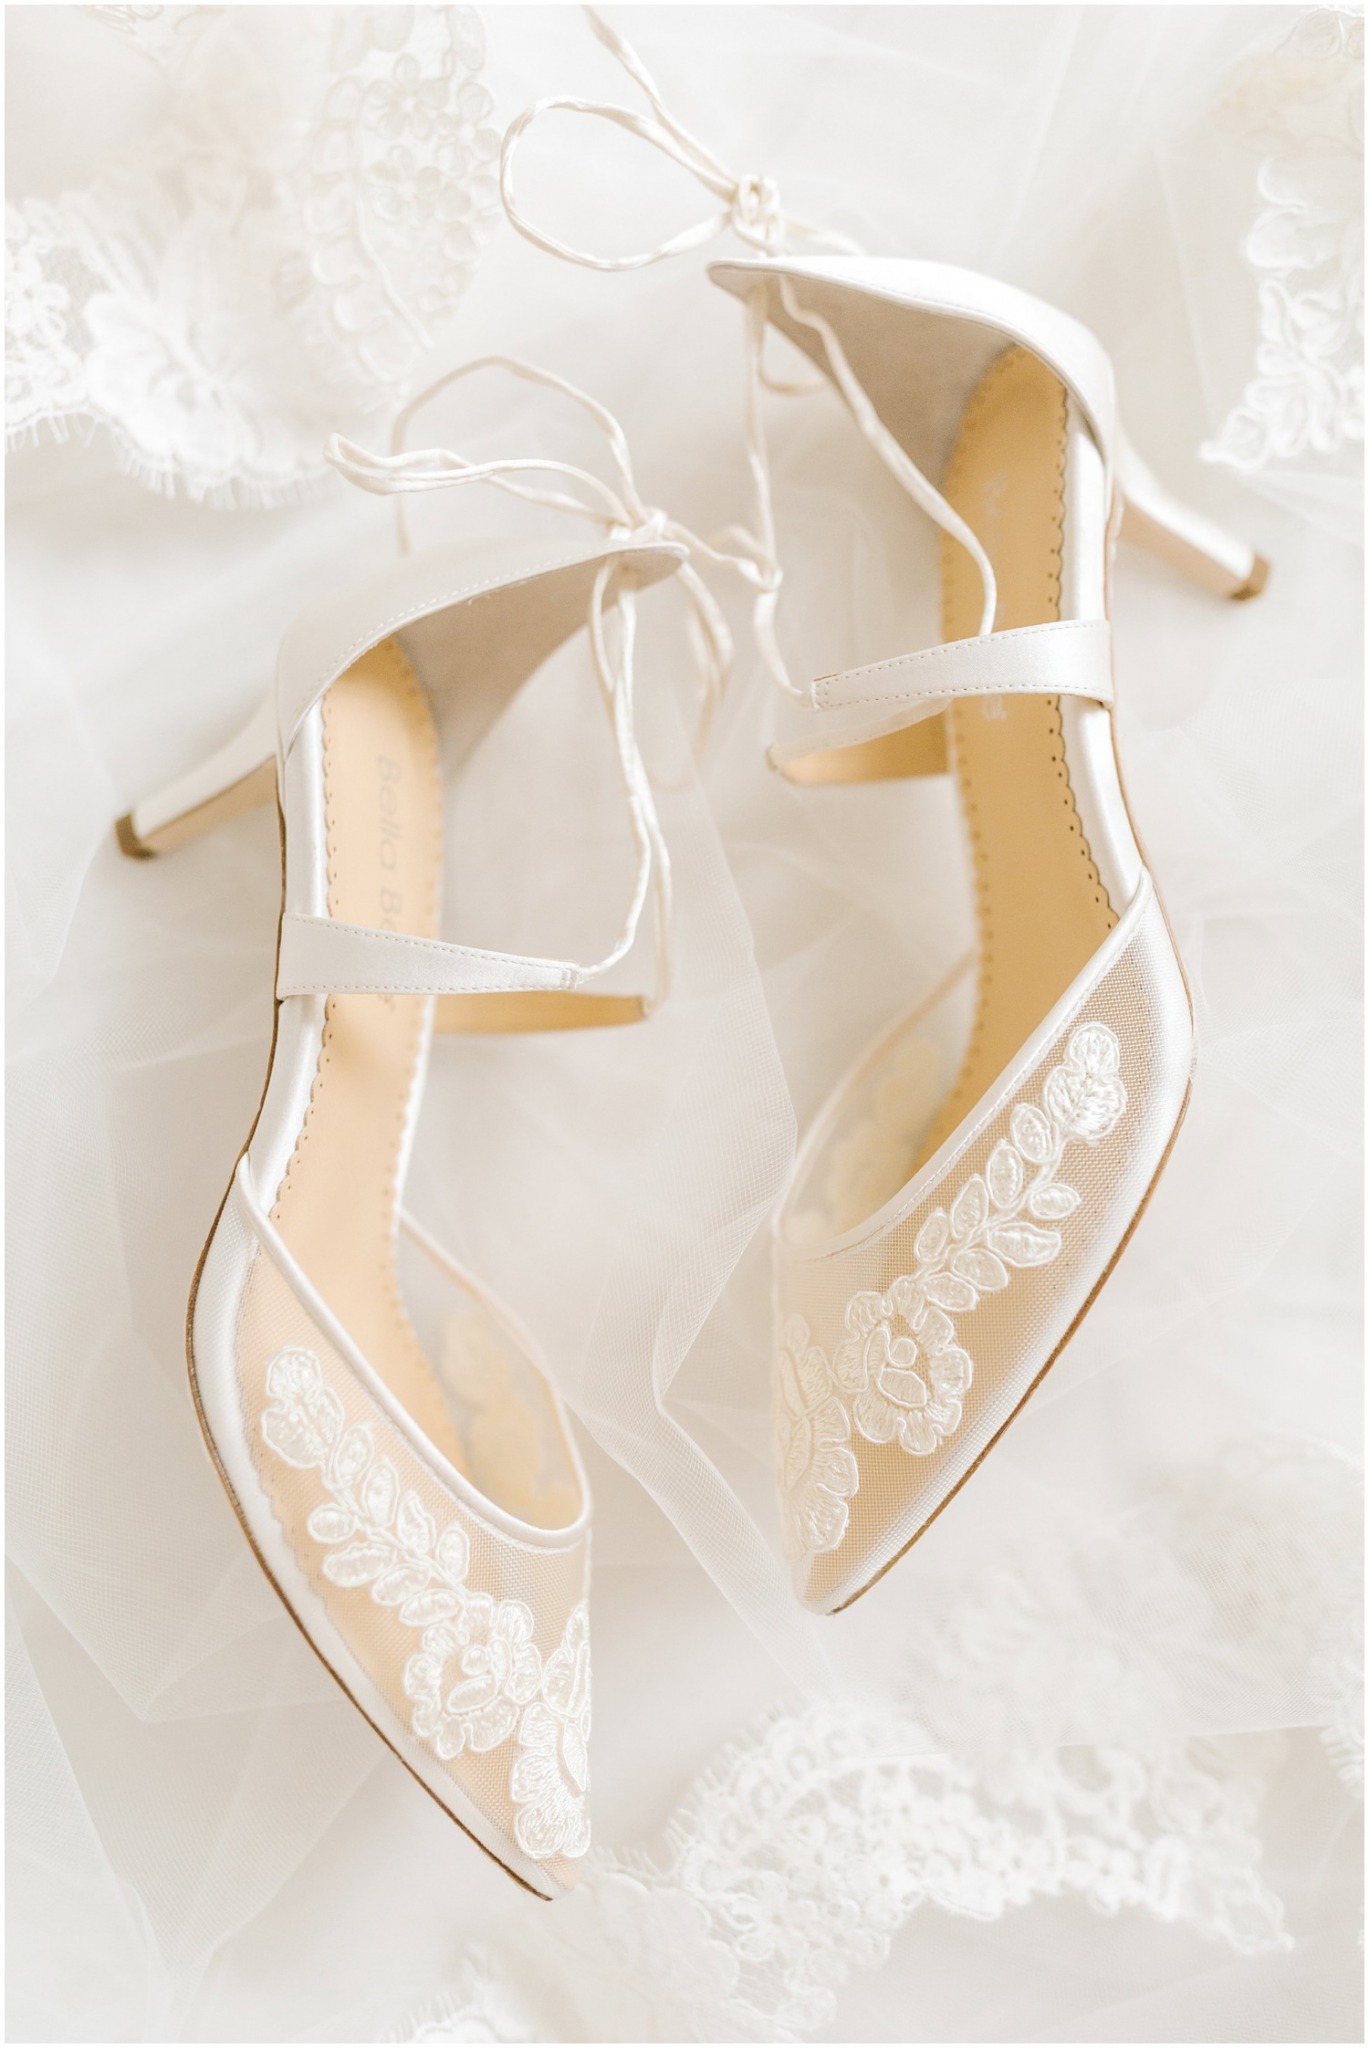 Chelsea Renay Photography phtoographs lace shoes for NC bride